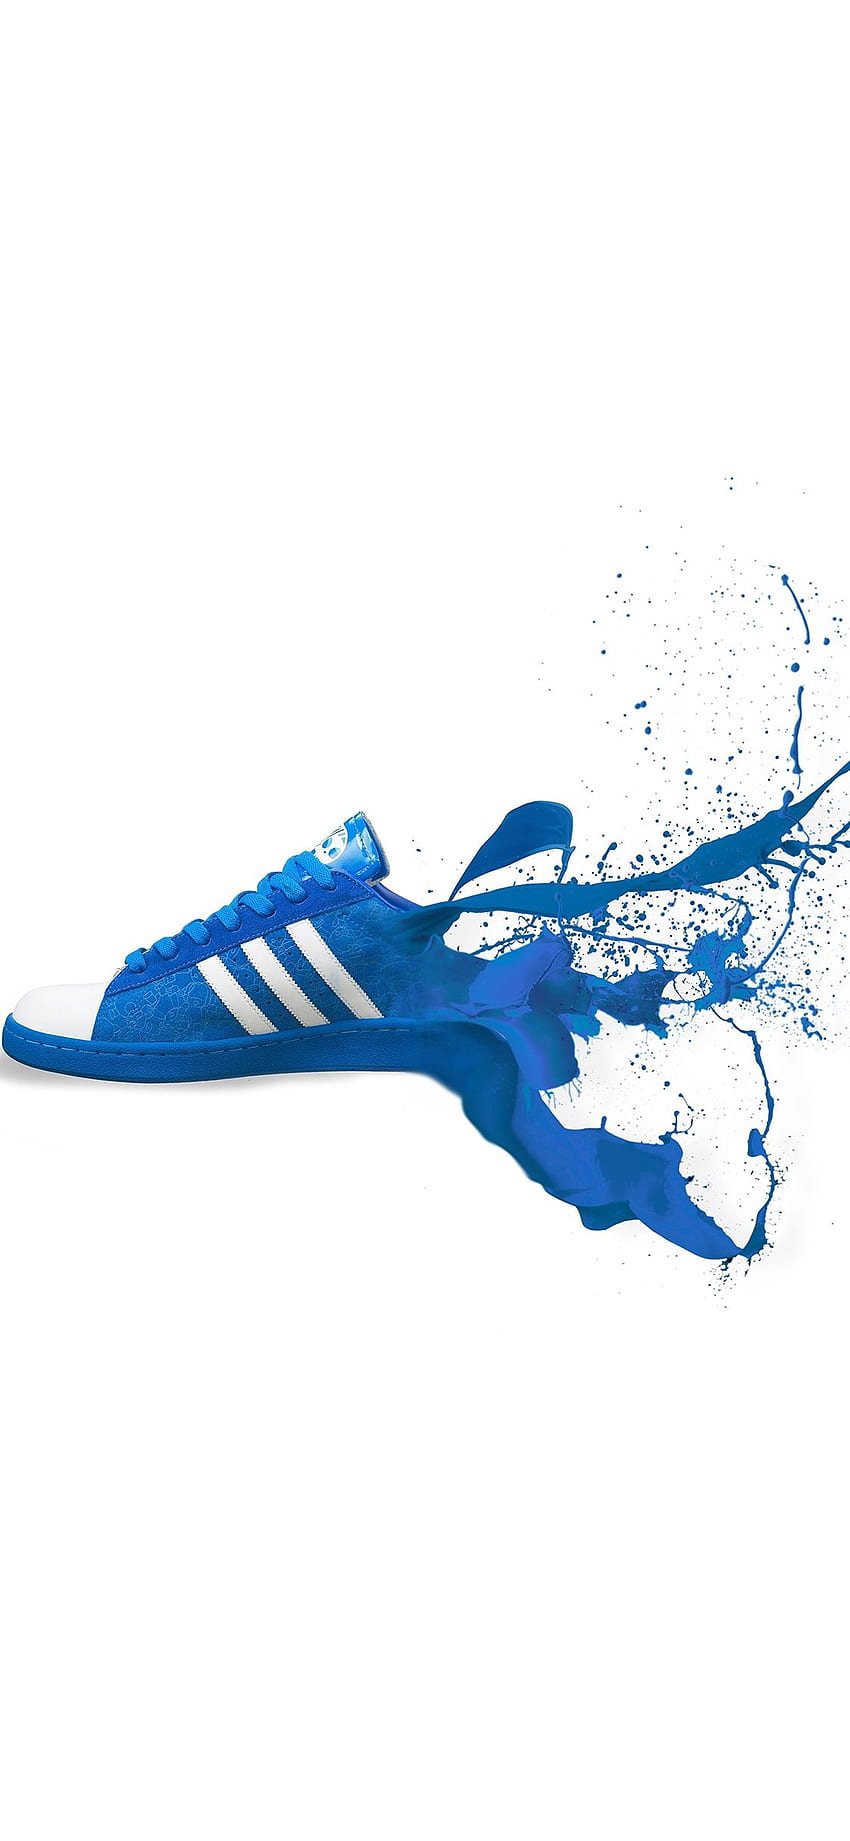 iPhone . adidas blue shoes sneakers HD phone wallpaper